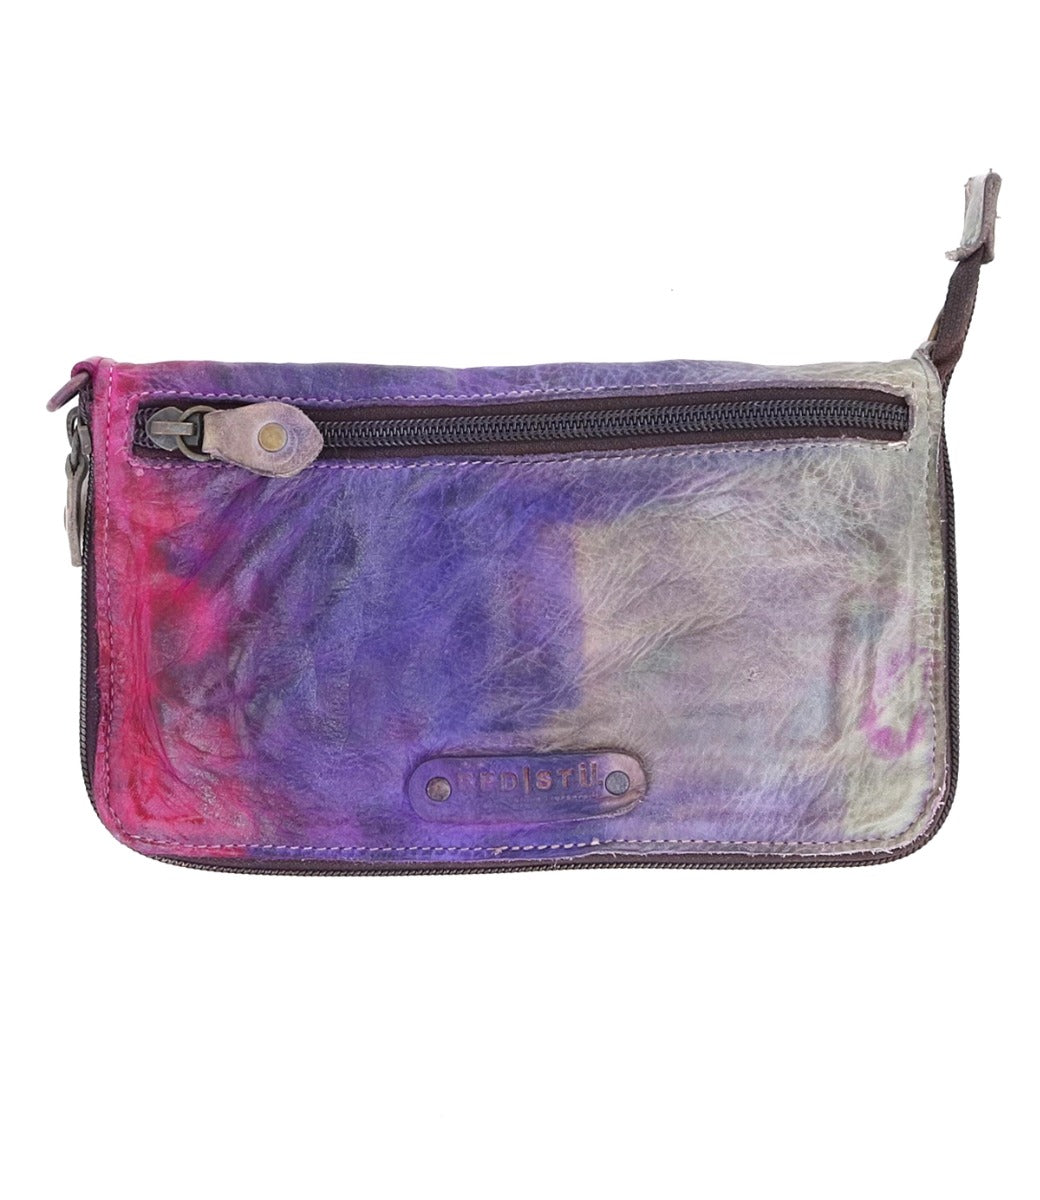 Bed Stu Templeton II pink and purple leather multi-functional pure leather clutch with zipper.